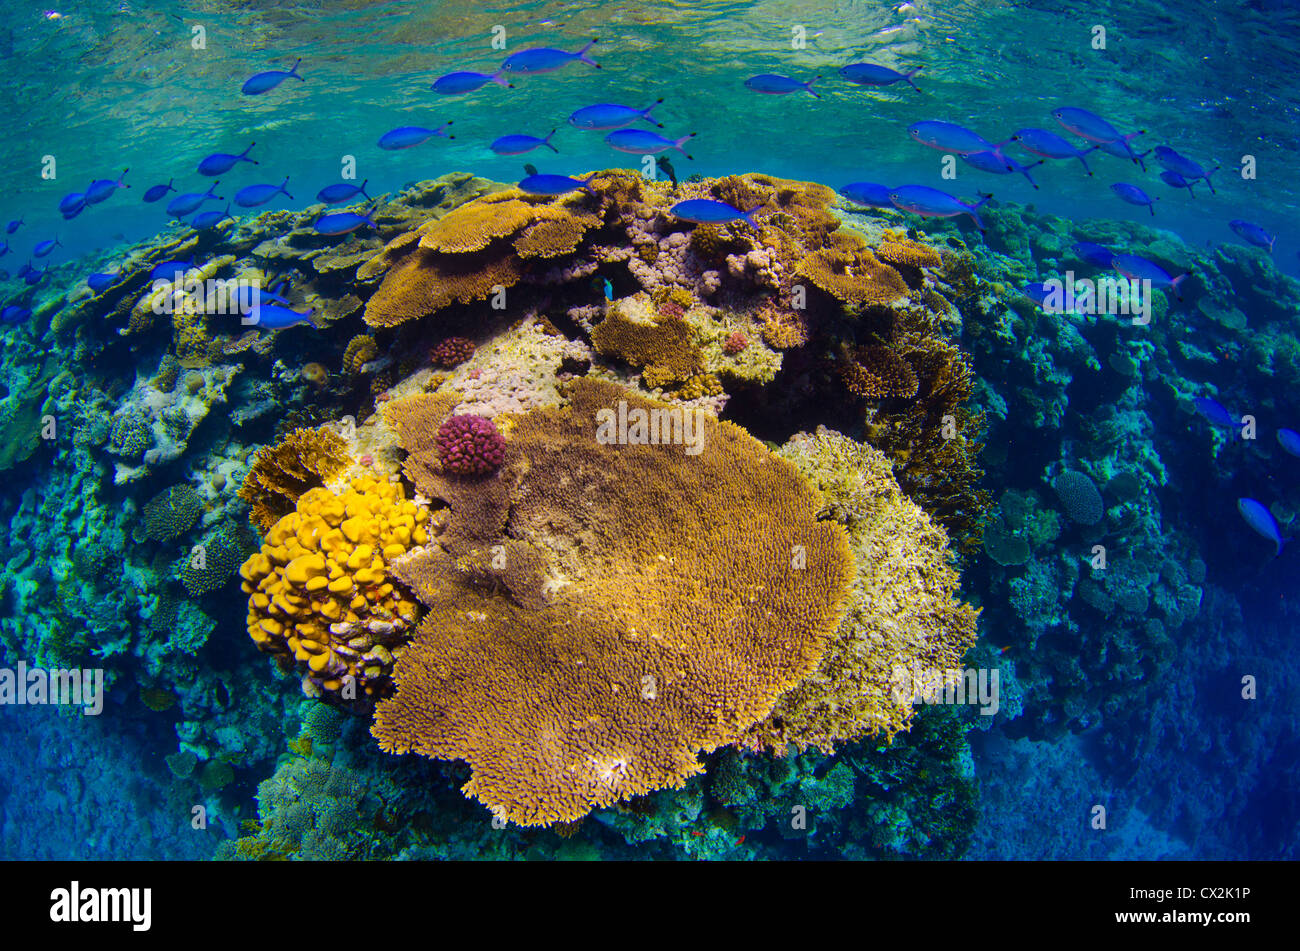 Red Sea, underwater, coral reef, sea life, marine life, ocean, scuba diving, vacation, water, fish, shallow water, blue water Stock Photo